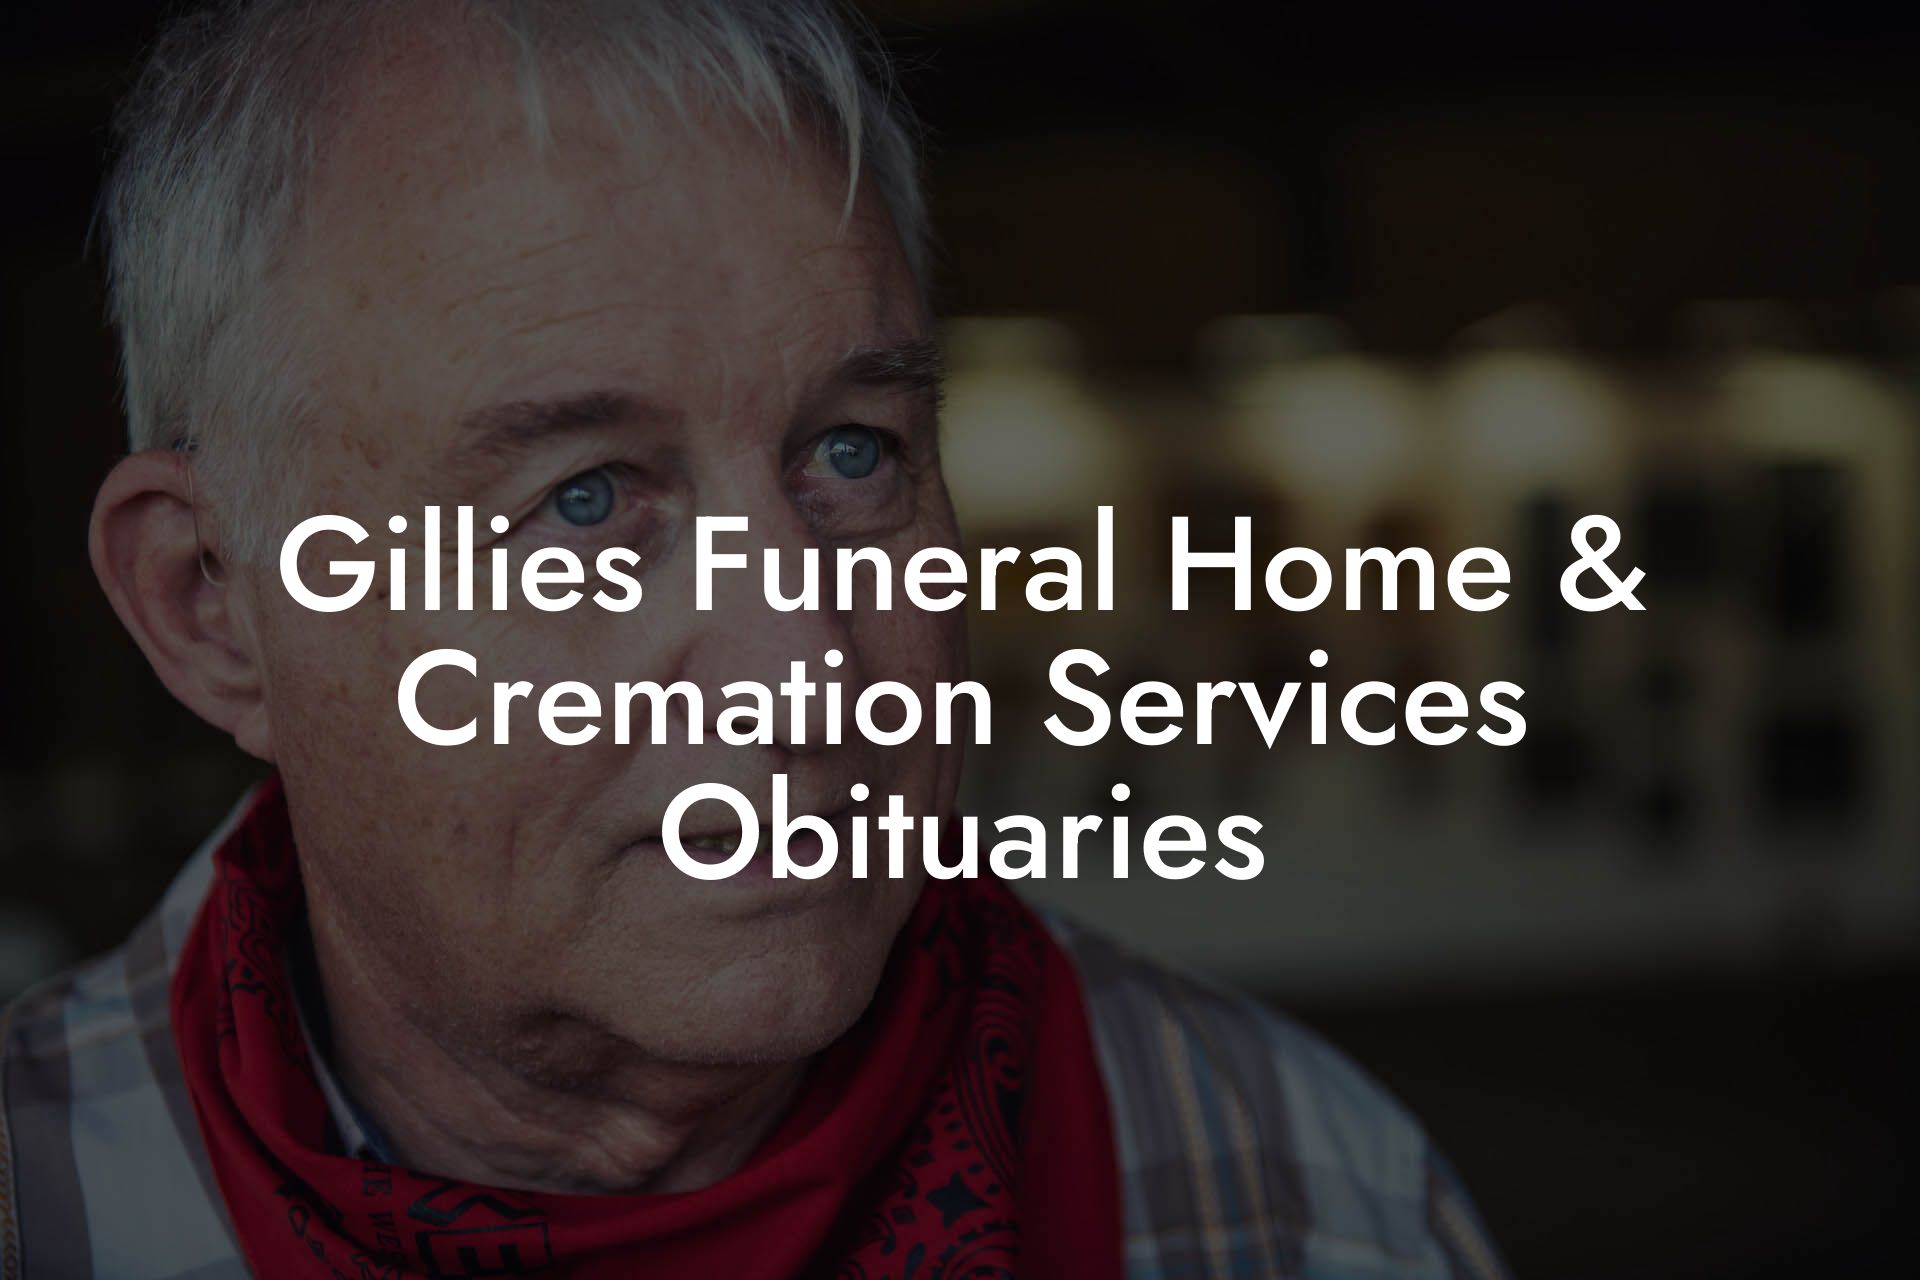 Gillies Funeral Home & Cremation Services Obituaries